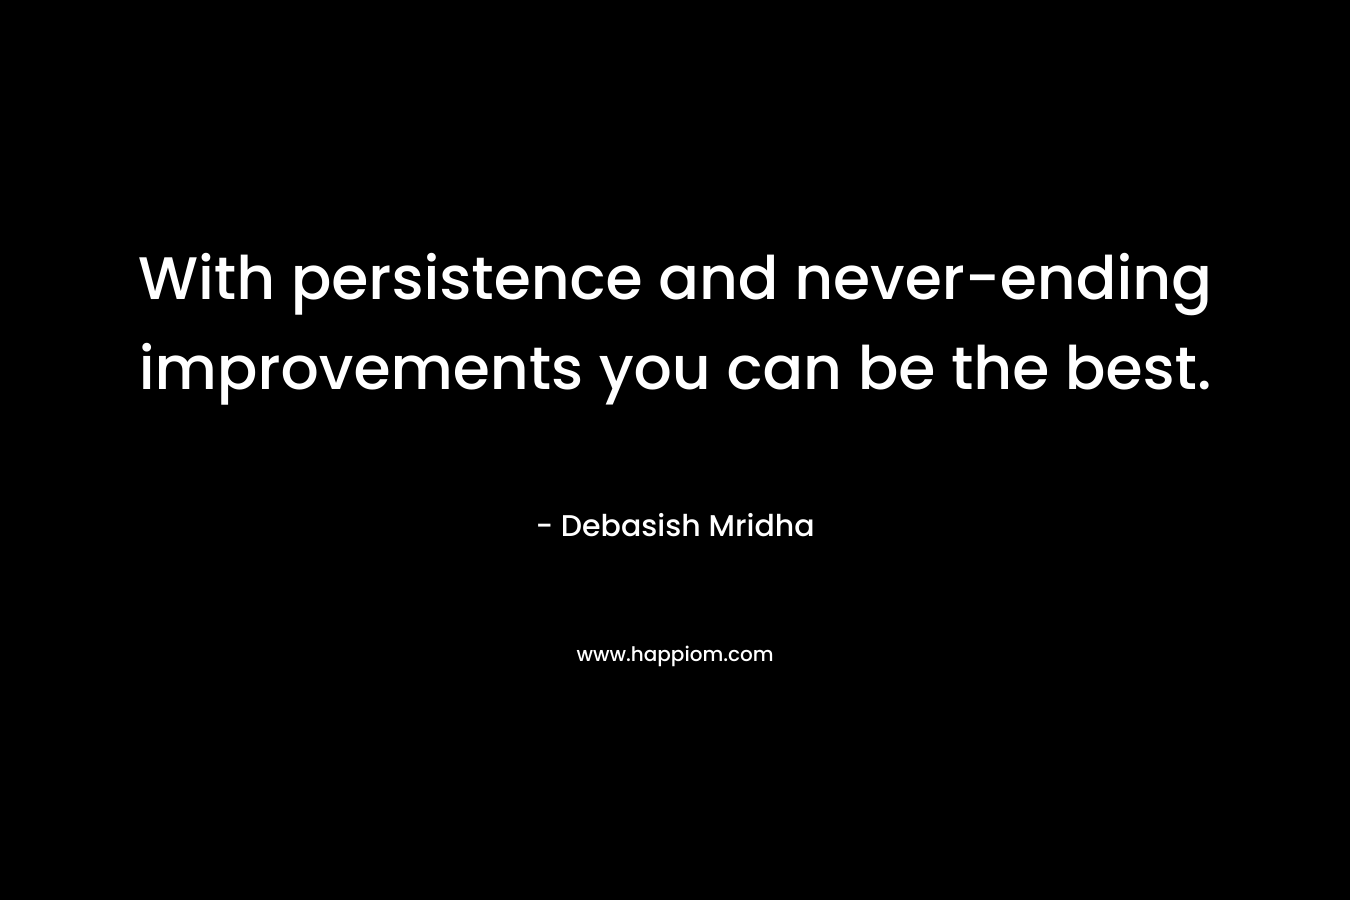 With persistence and never-ending improvements you can be the best. – Debasish Mridha